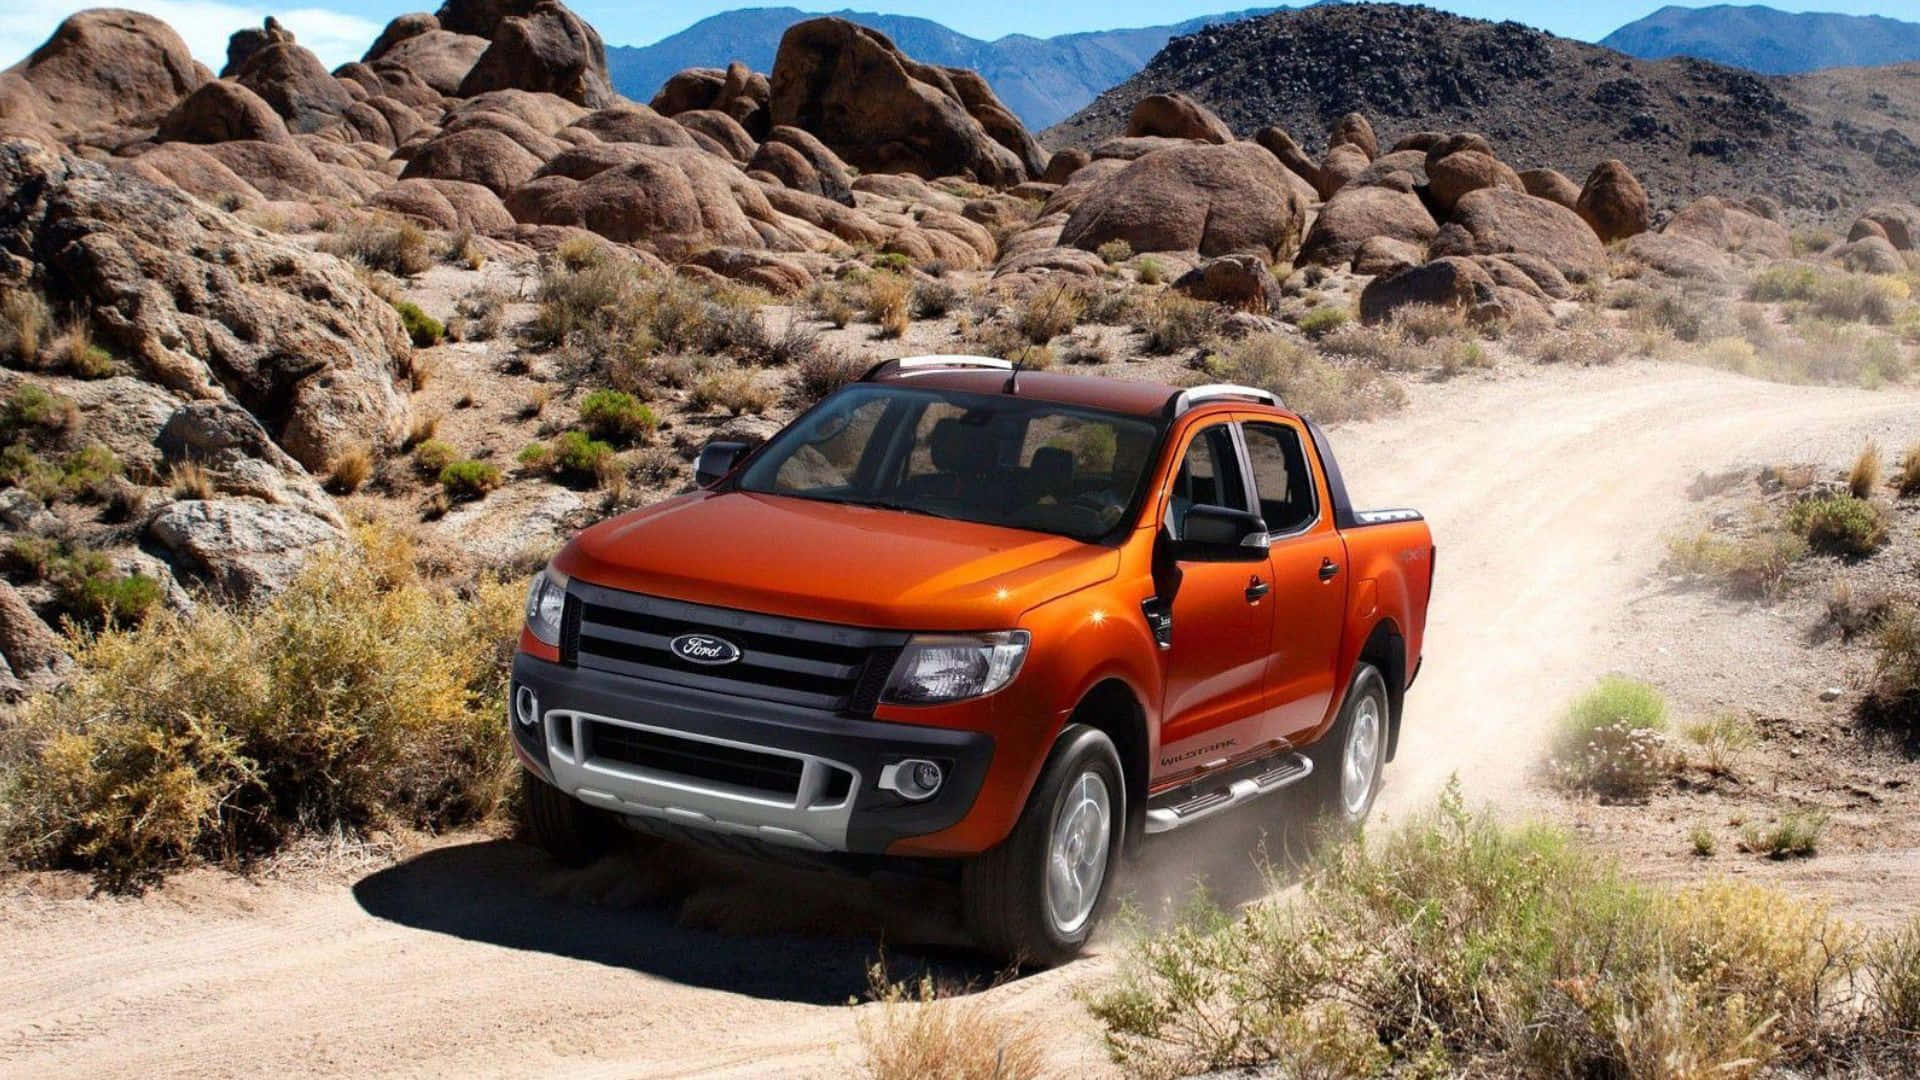 Majestic Ford Ranger on a Scenic Off-Road Adventure Wallpaper